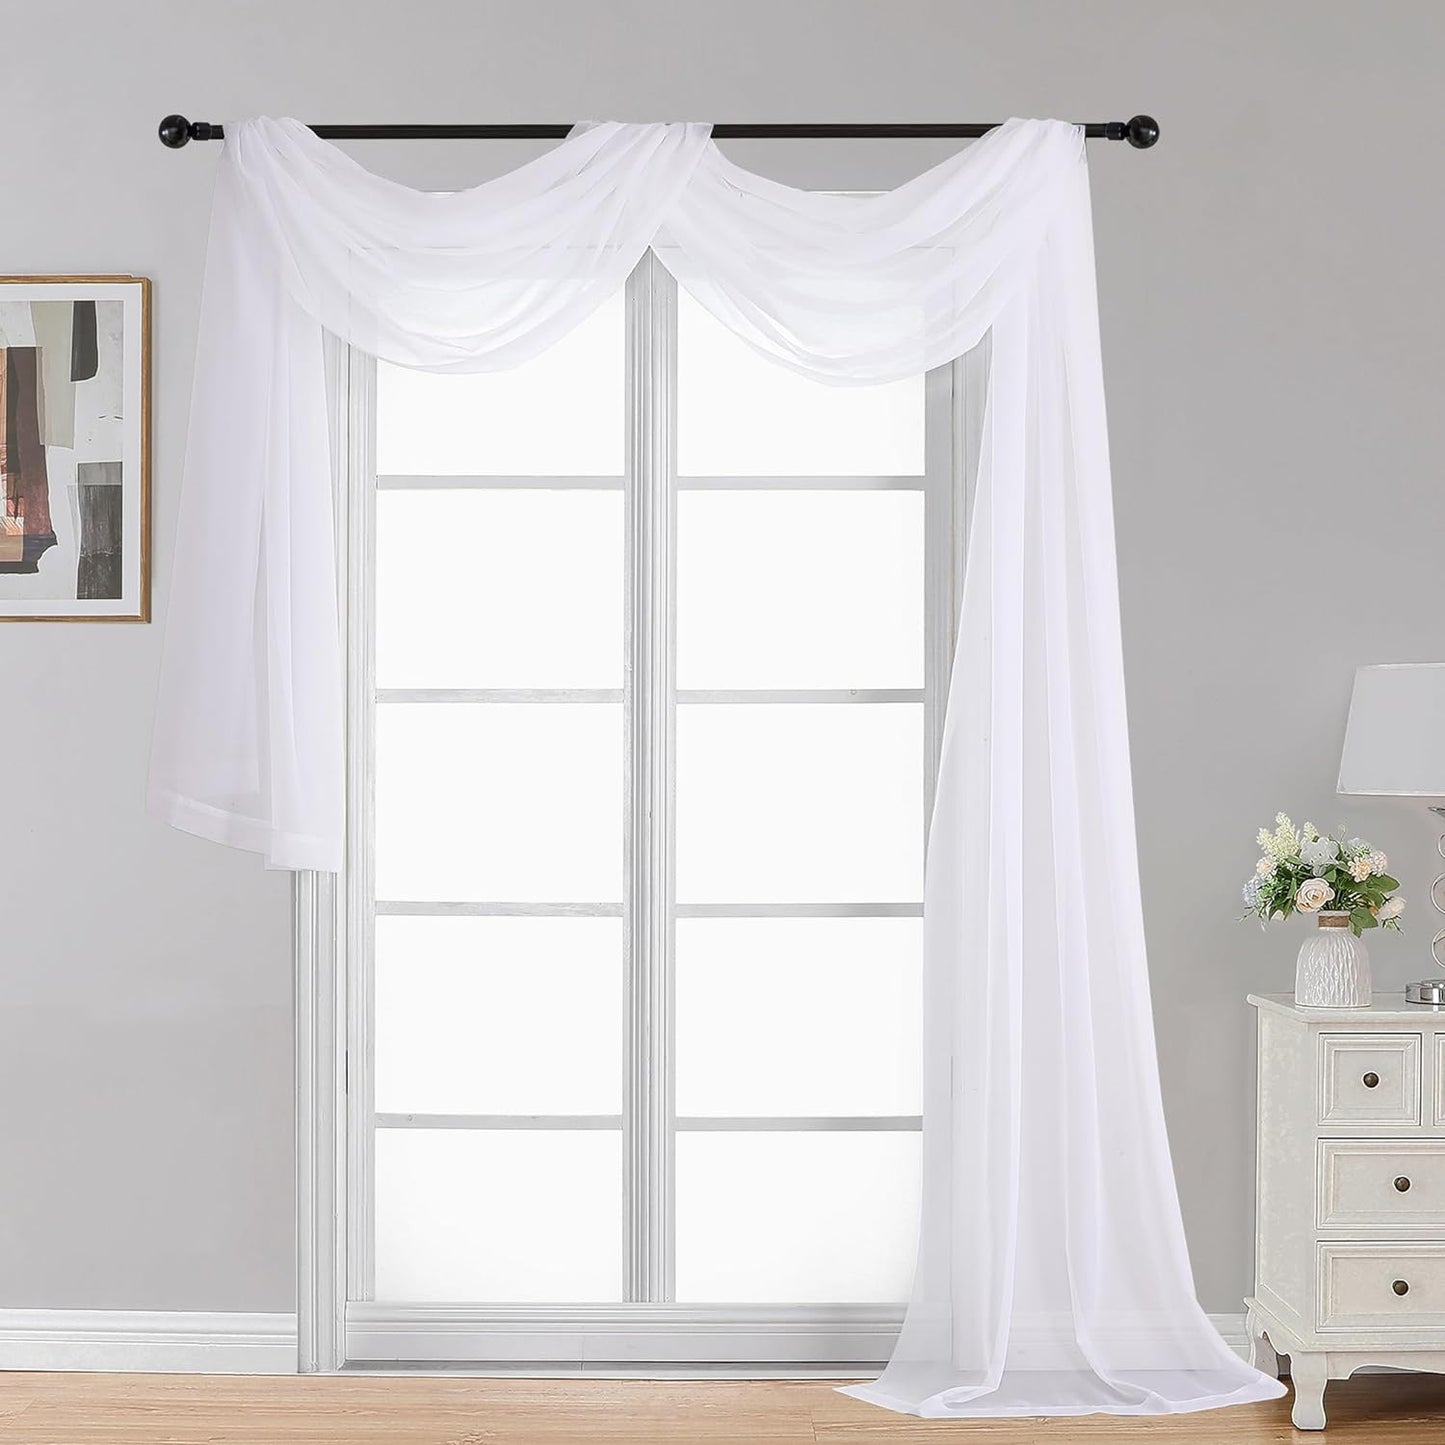 OWENIE White Sheer Valance for Window, Small Short Rod Pocket Voile Valance Curtain Window Treatment Decor for Living Room Bathroom Kitchen Cafe Laundry Basement, 60" W X 14" L  OWENIE White 42W X 216L 